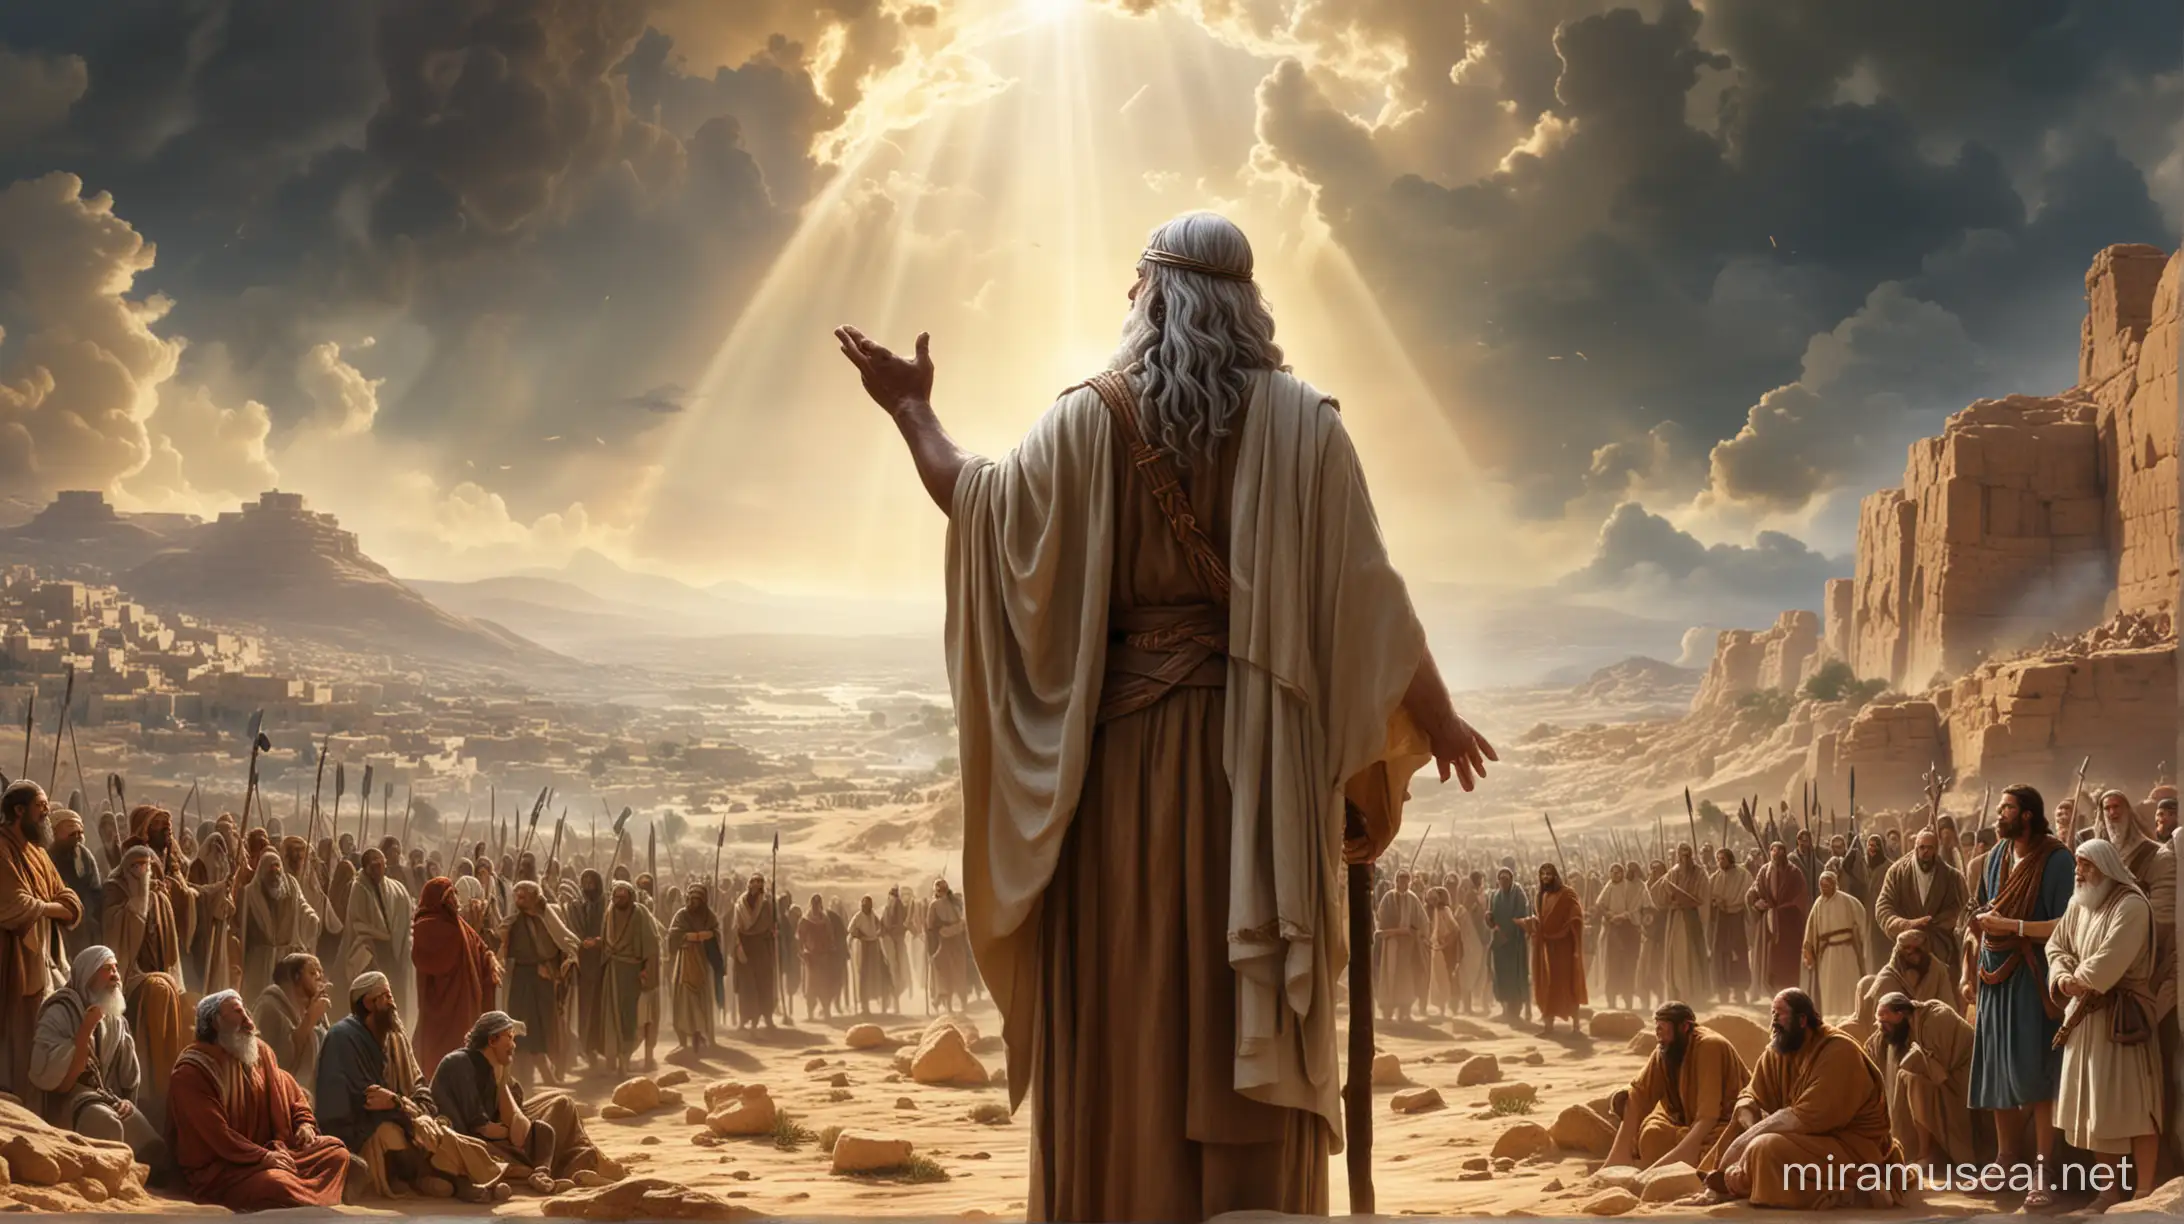 Moses and God have a conversation regarding the people of Israel